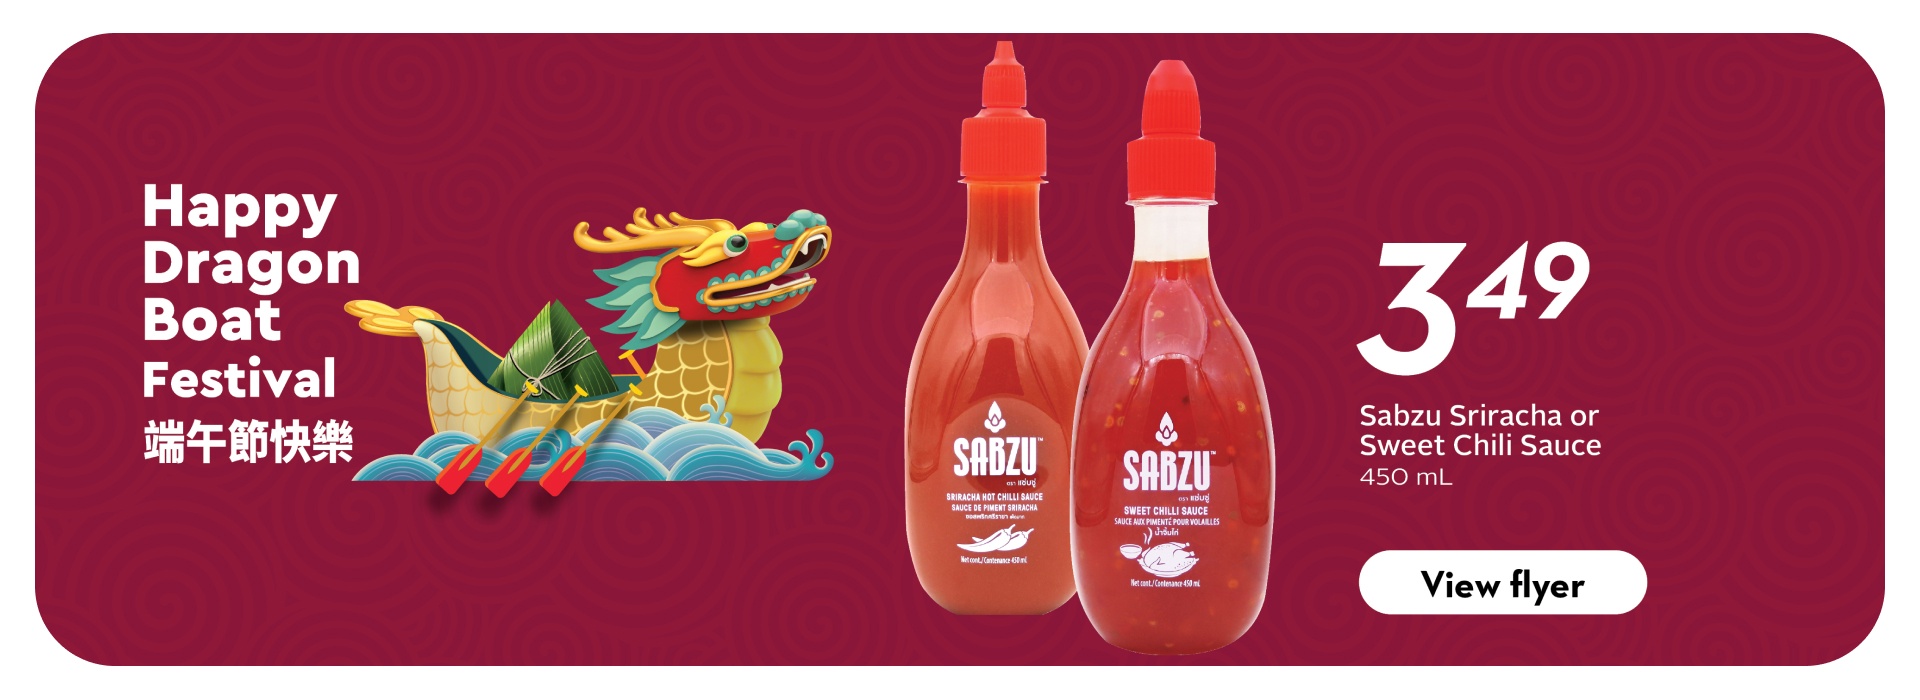 The following image contains the text, " Happy Dragon Boat Festival, buy sabzu sriracha or sweet chilli sauce 450 ml, along with the 'view flyer' button.